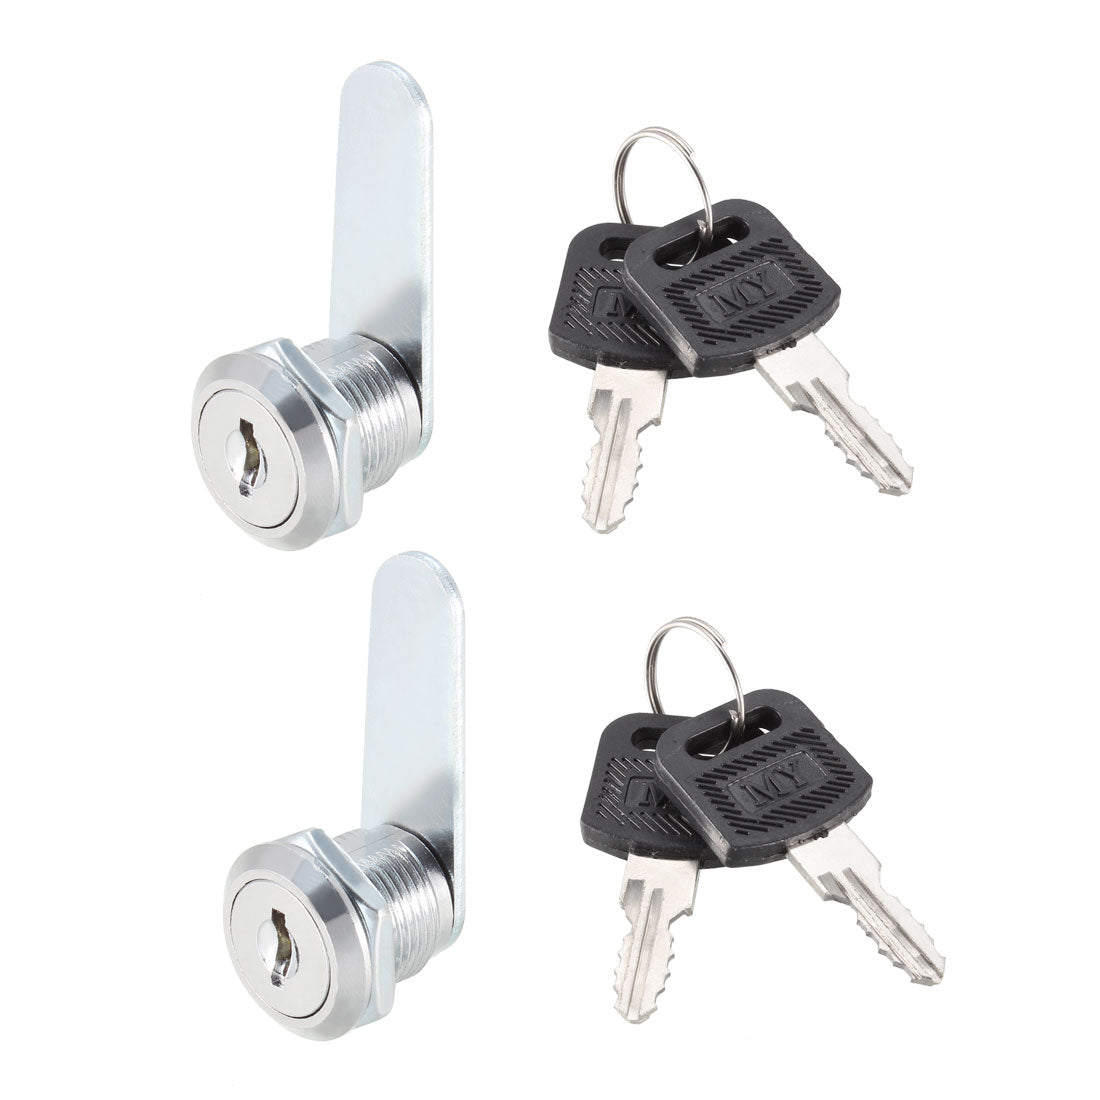 Uxcell Uxcell Cam Lock 30mm Cylinder Length Fits Max 7/8-inch Panel Keyed Different 2Pcs